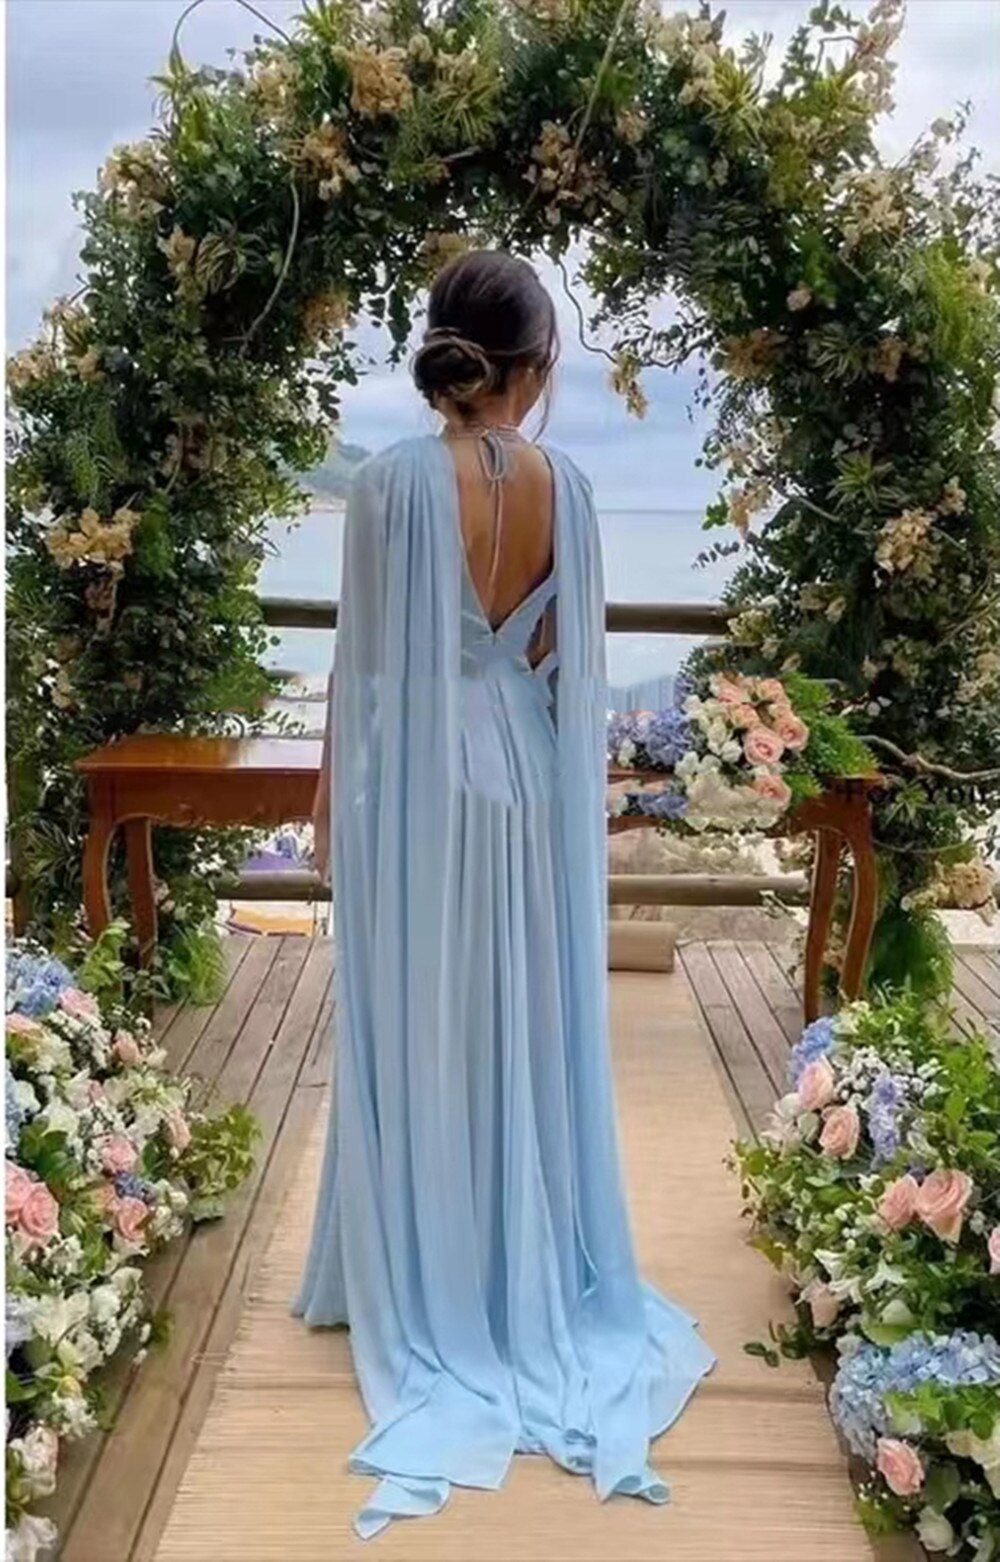 Long A Line Bridesmaid Dresses With Streamer Cape Sky Blue Chiffon Plunging Neck Backless Party Dress Maid Of Honor